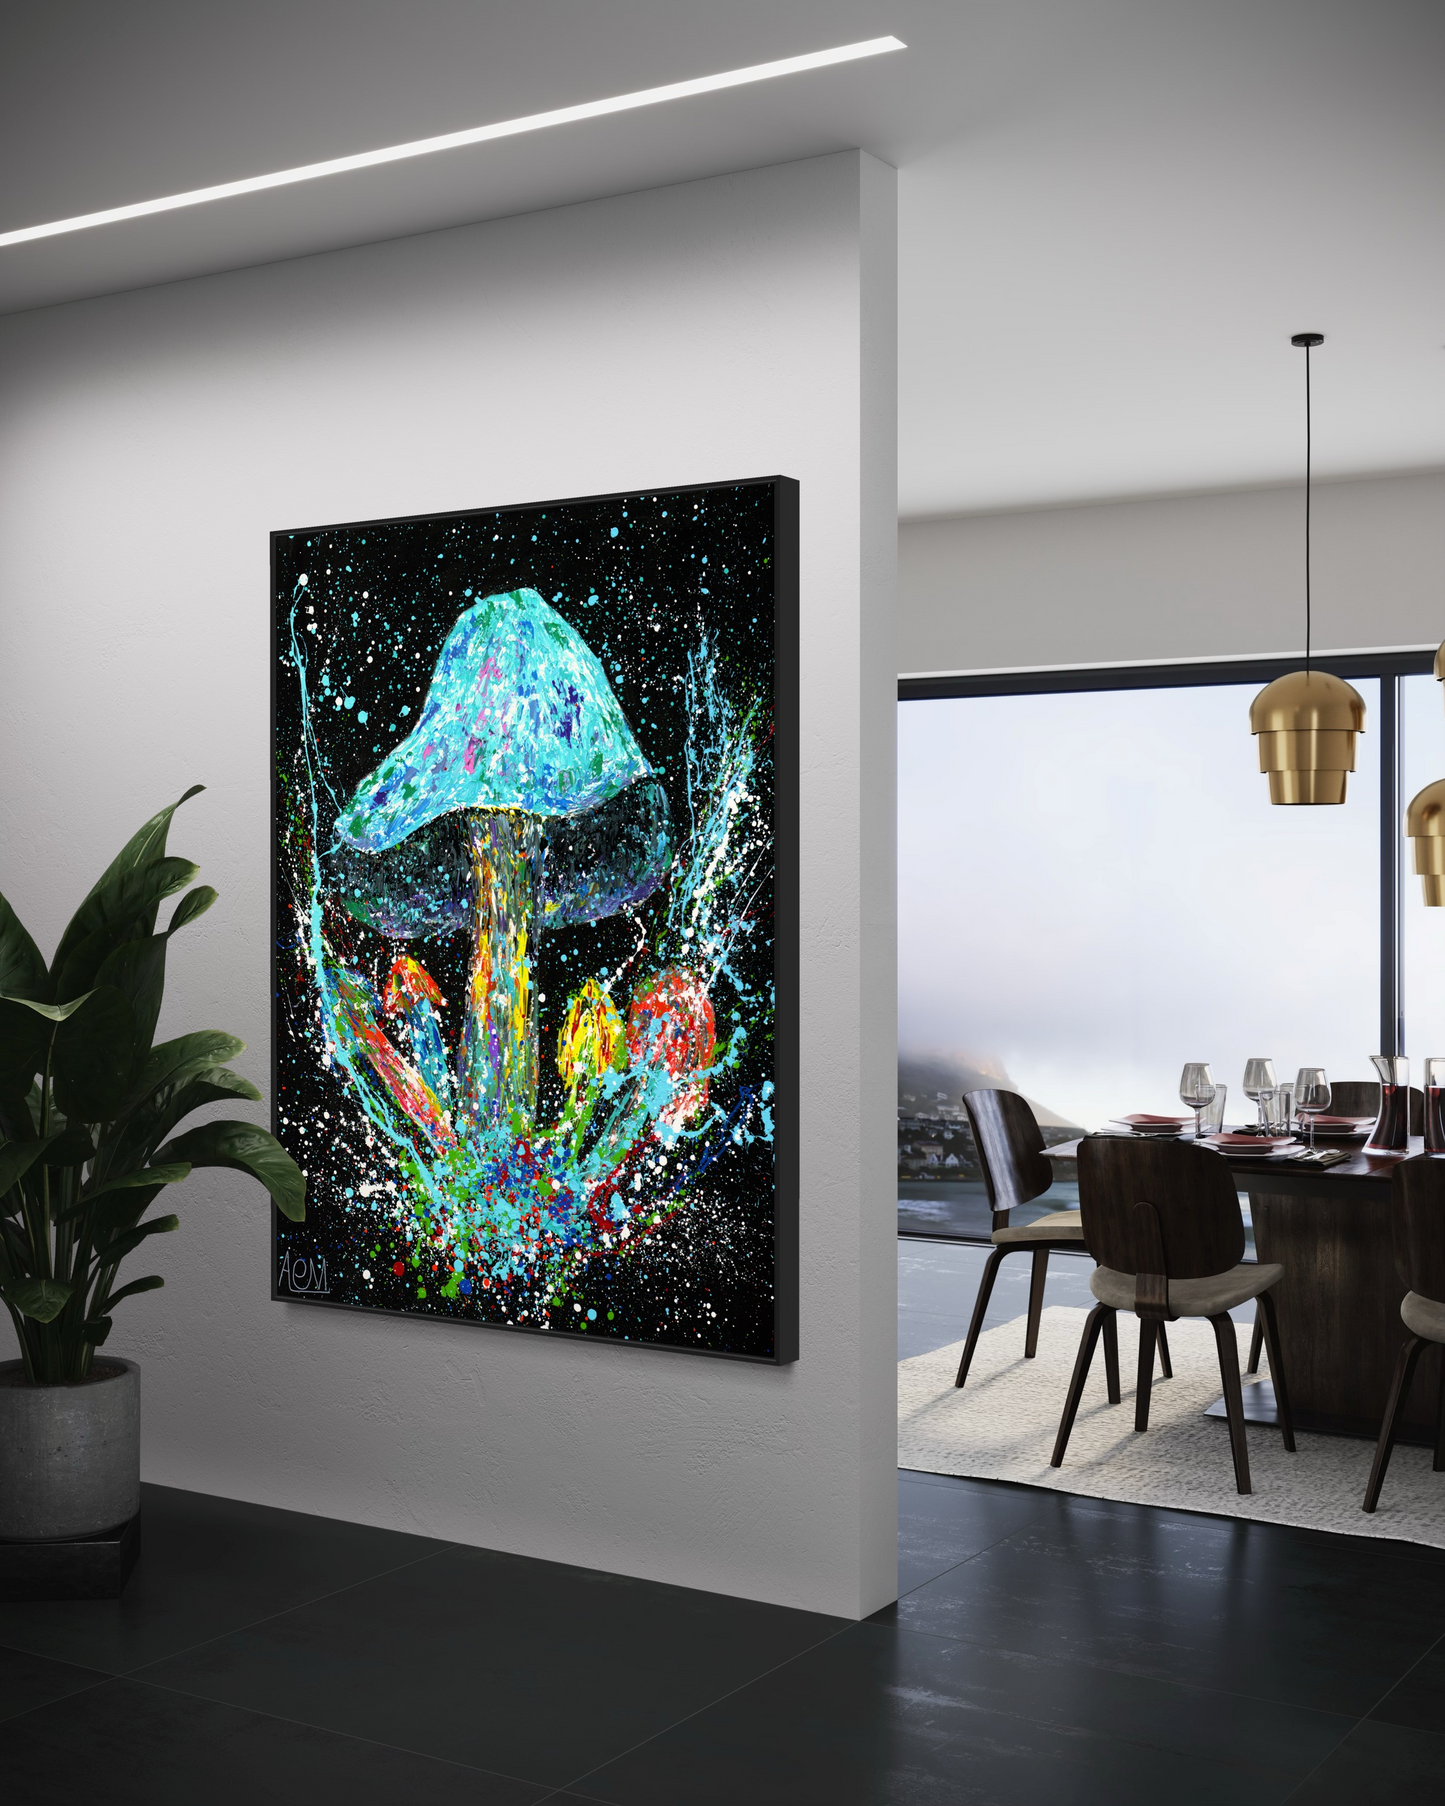 Luxurious open-plan space illuminated by minimalist LED lighting, featuring a bold, abstract canvas art piece of a colorful mushroom set against a cosmic background, adjacent to a sophisticated dining area with a view of the outdoors